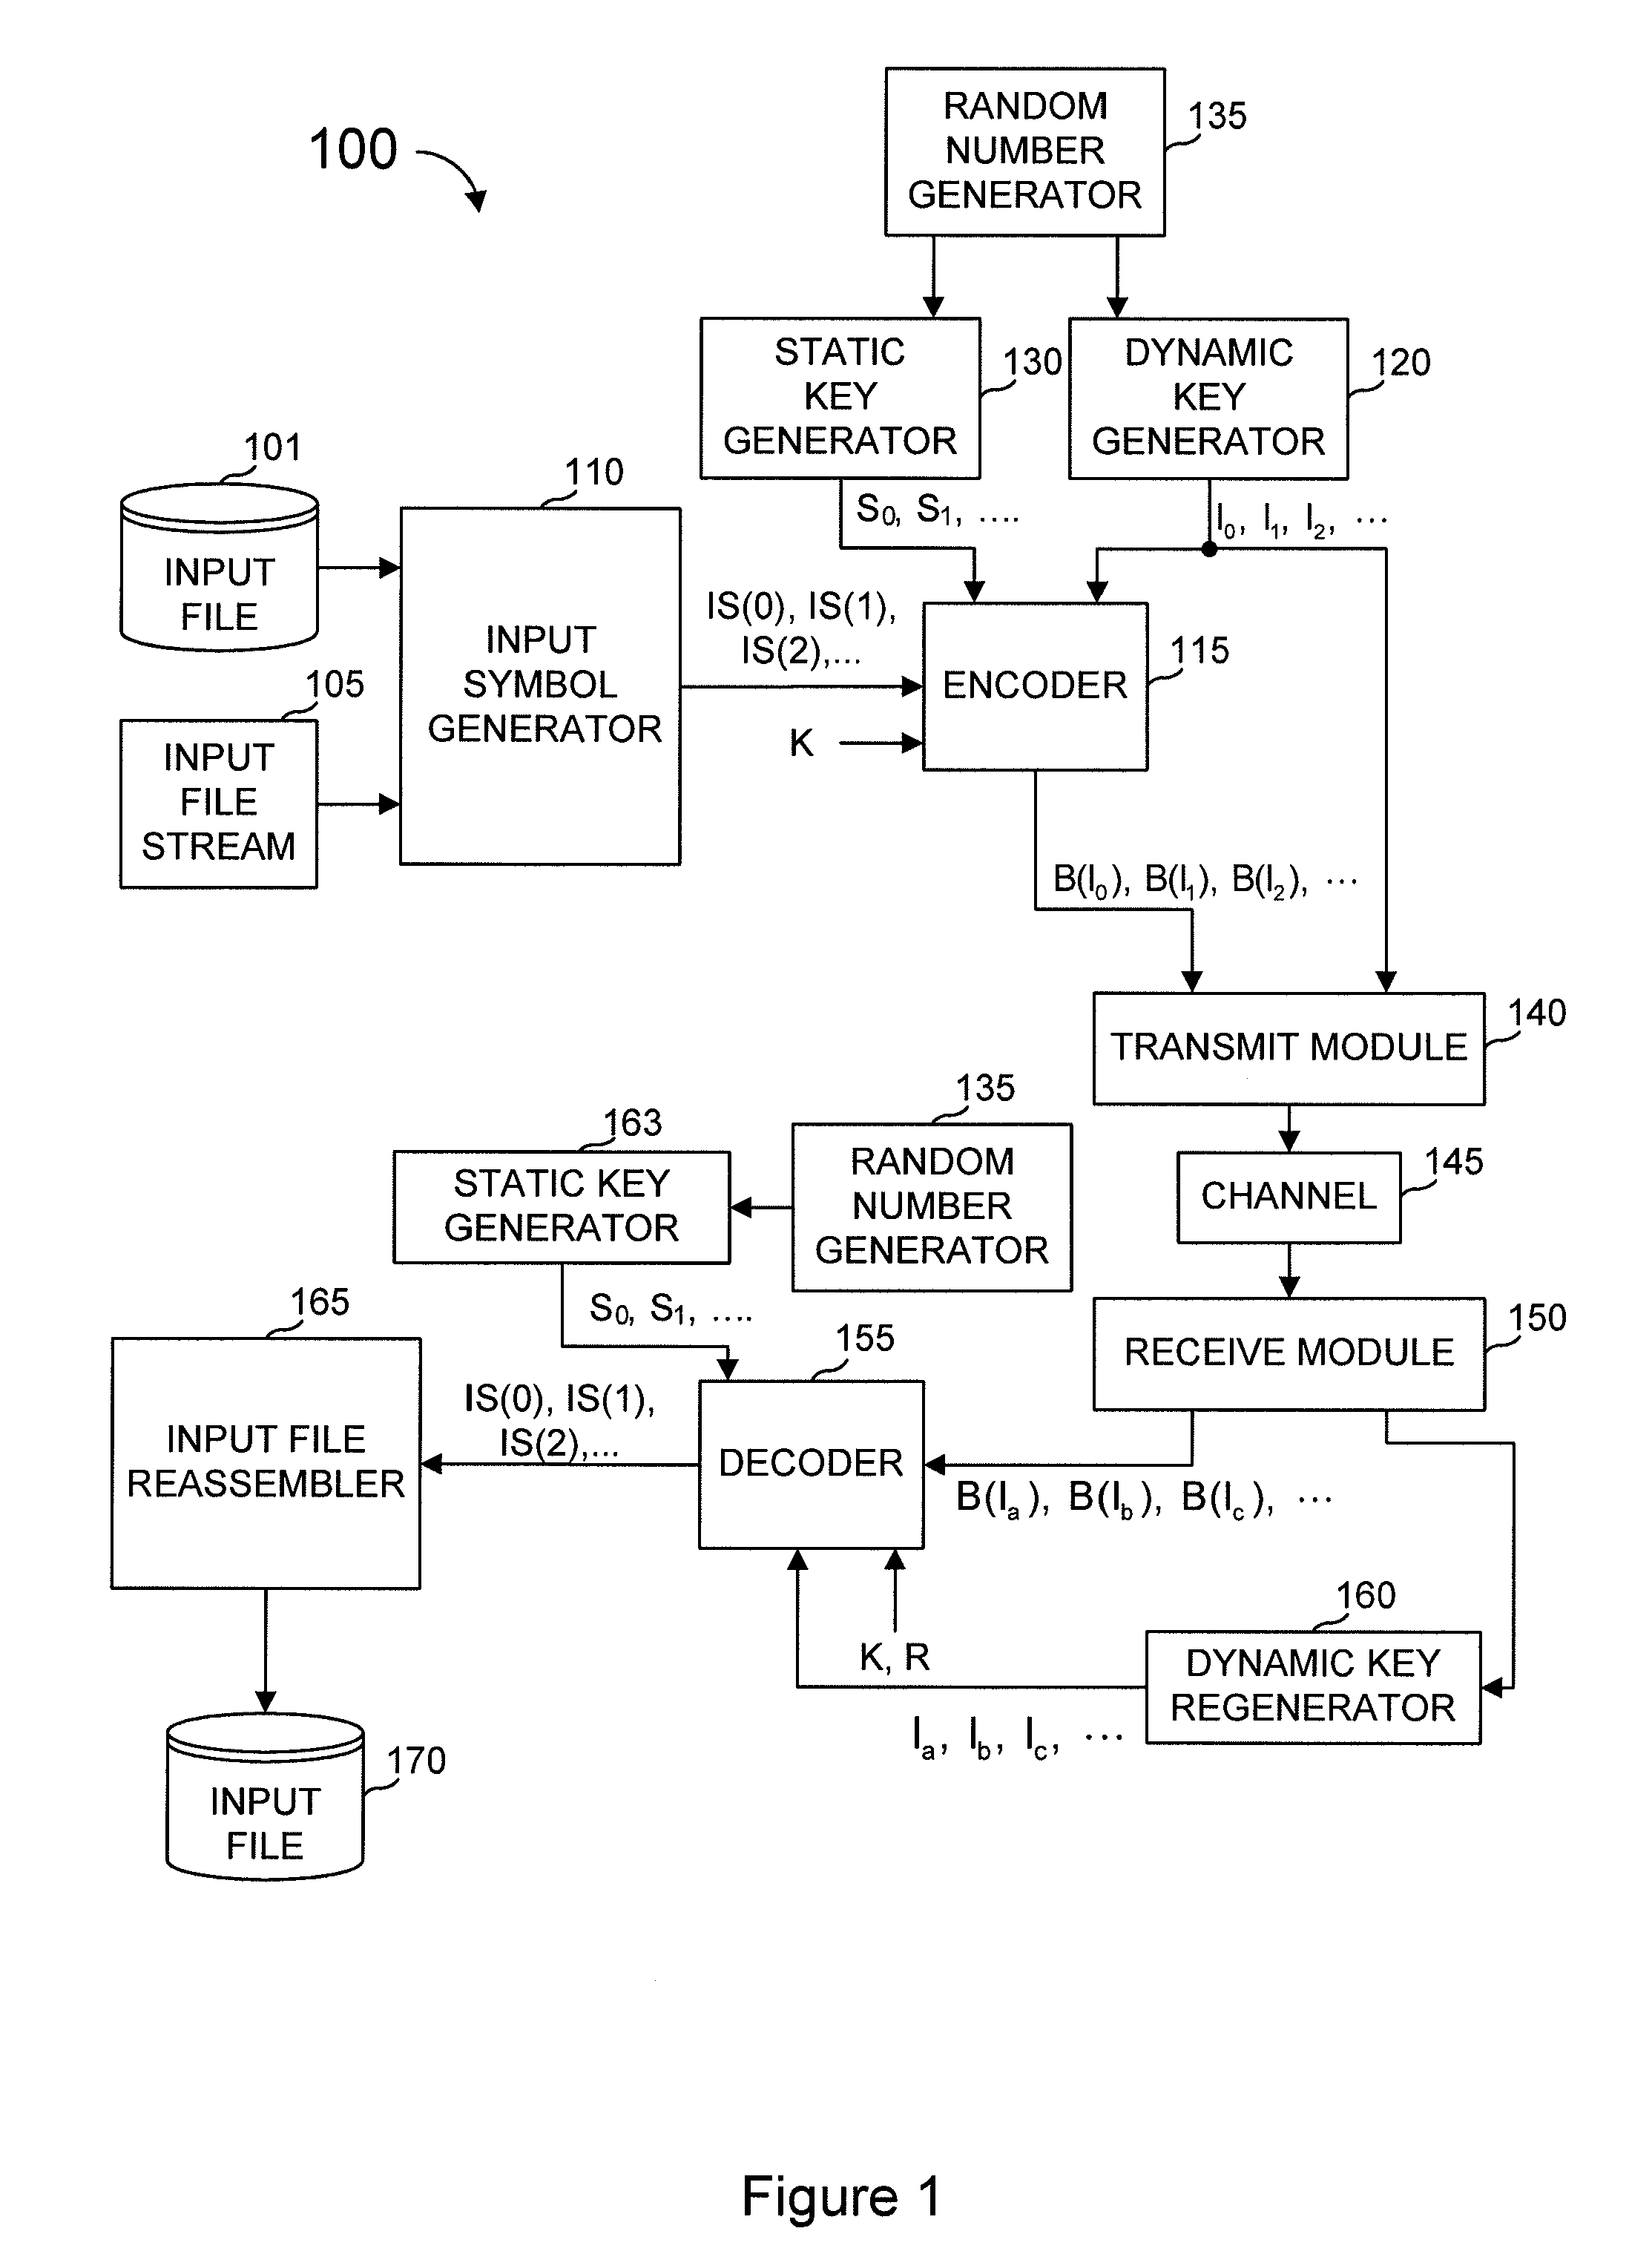 Method and apparatus for fast encoding of data symbols according to half-weight codes